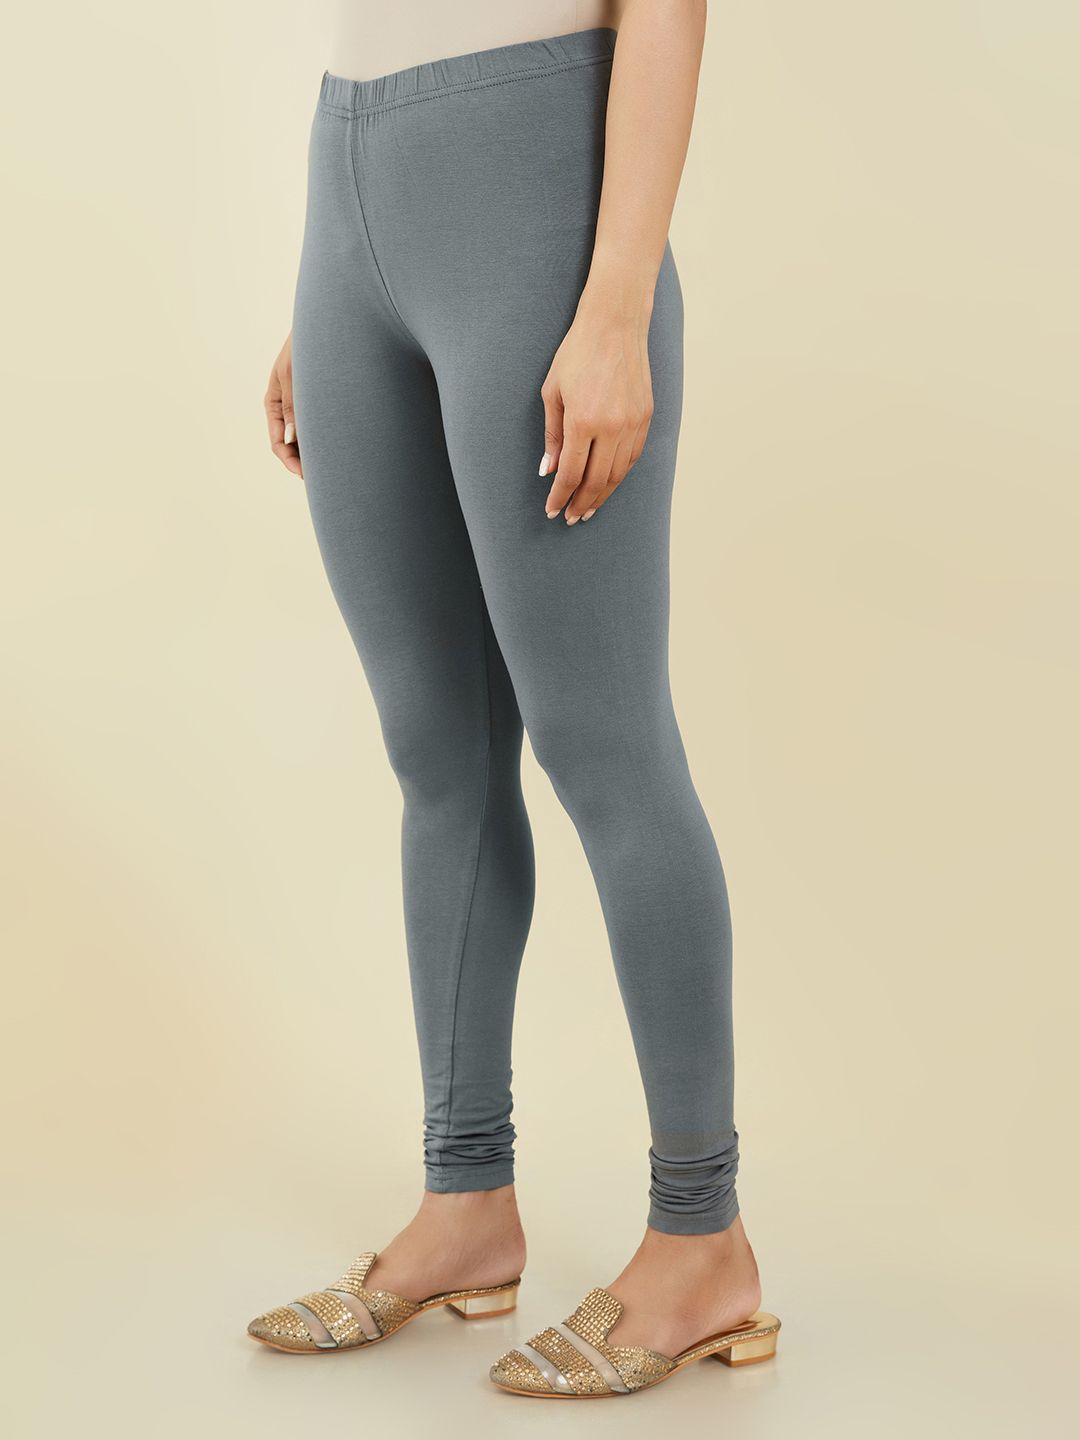 Beige Churidar Collection For Women at Soch USA & Worldwide Shop Silver  Grey Solid Cotton Spandex Ankle Length Legging